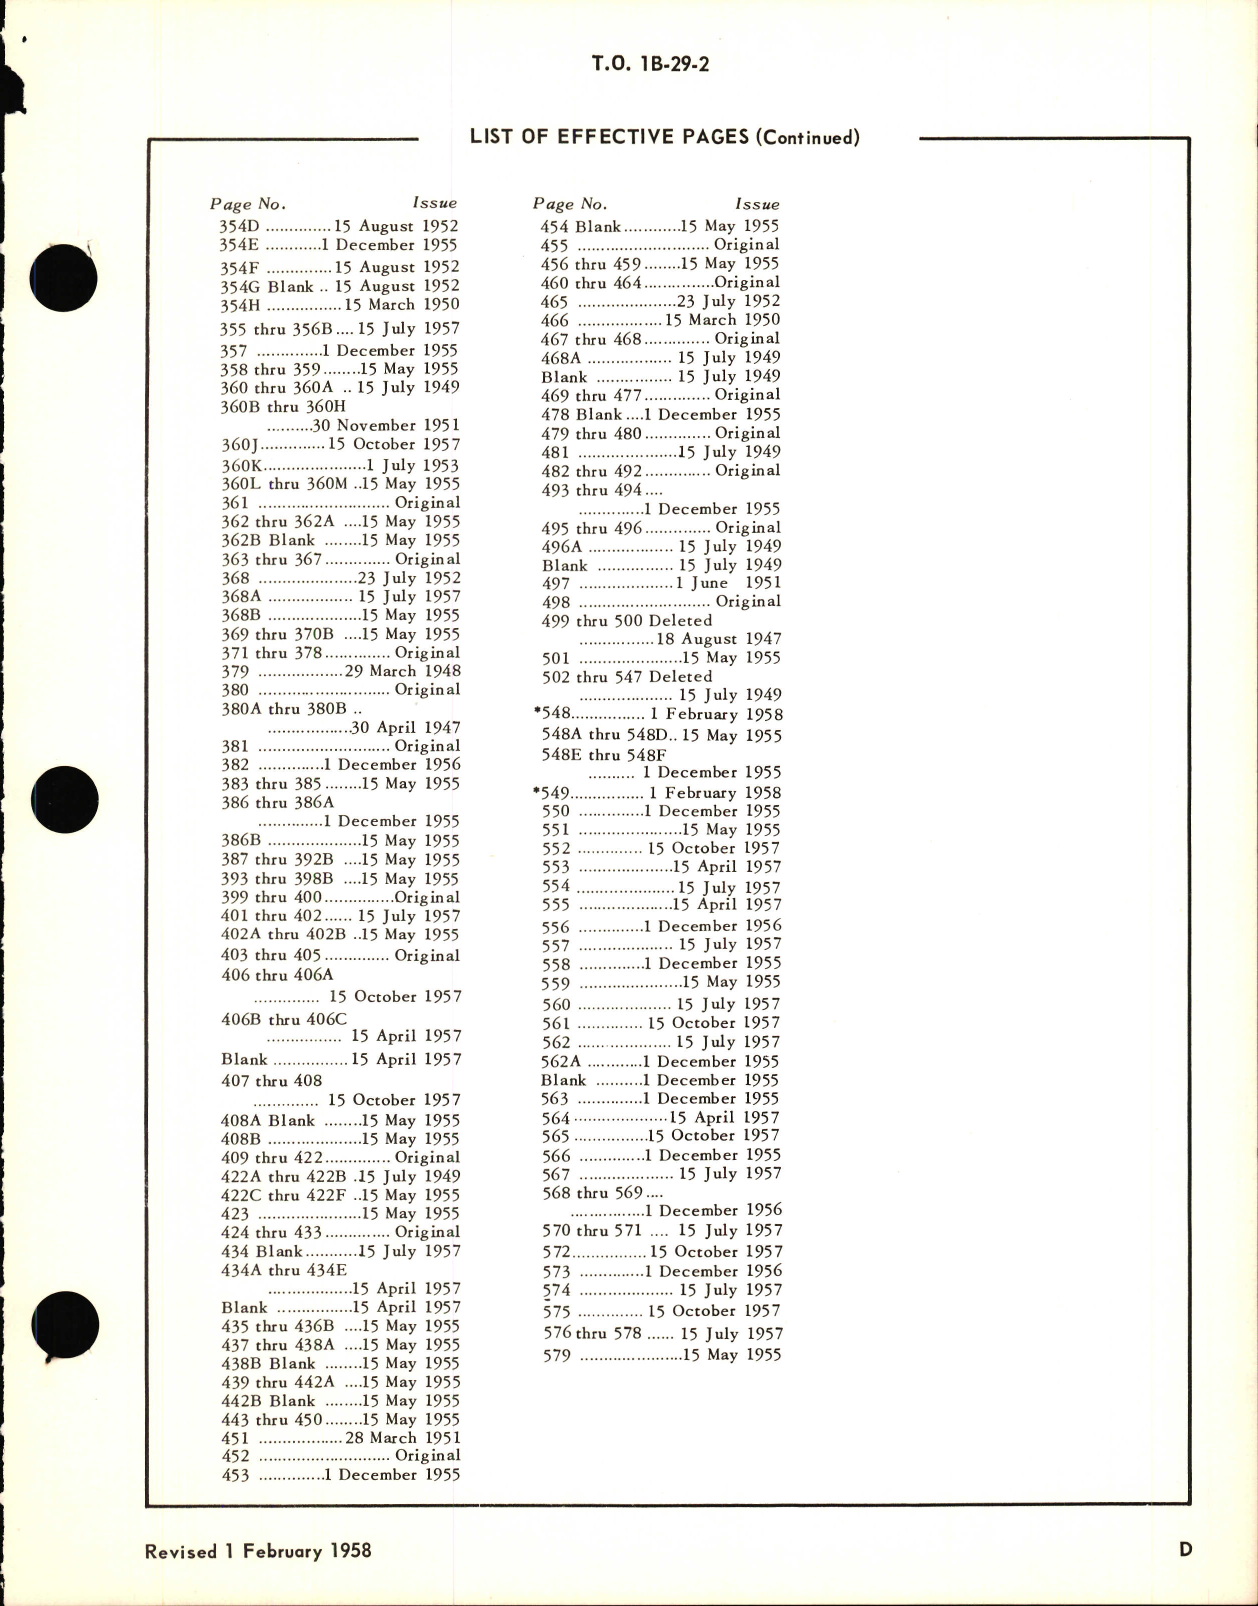 Sample page 5 from AirCorps Library document: Maintenance Instructions for B-29, B-29A, and TB-29 